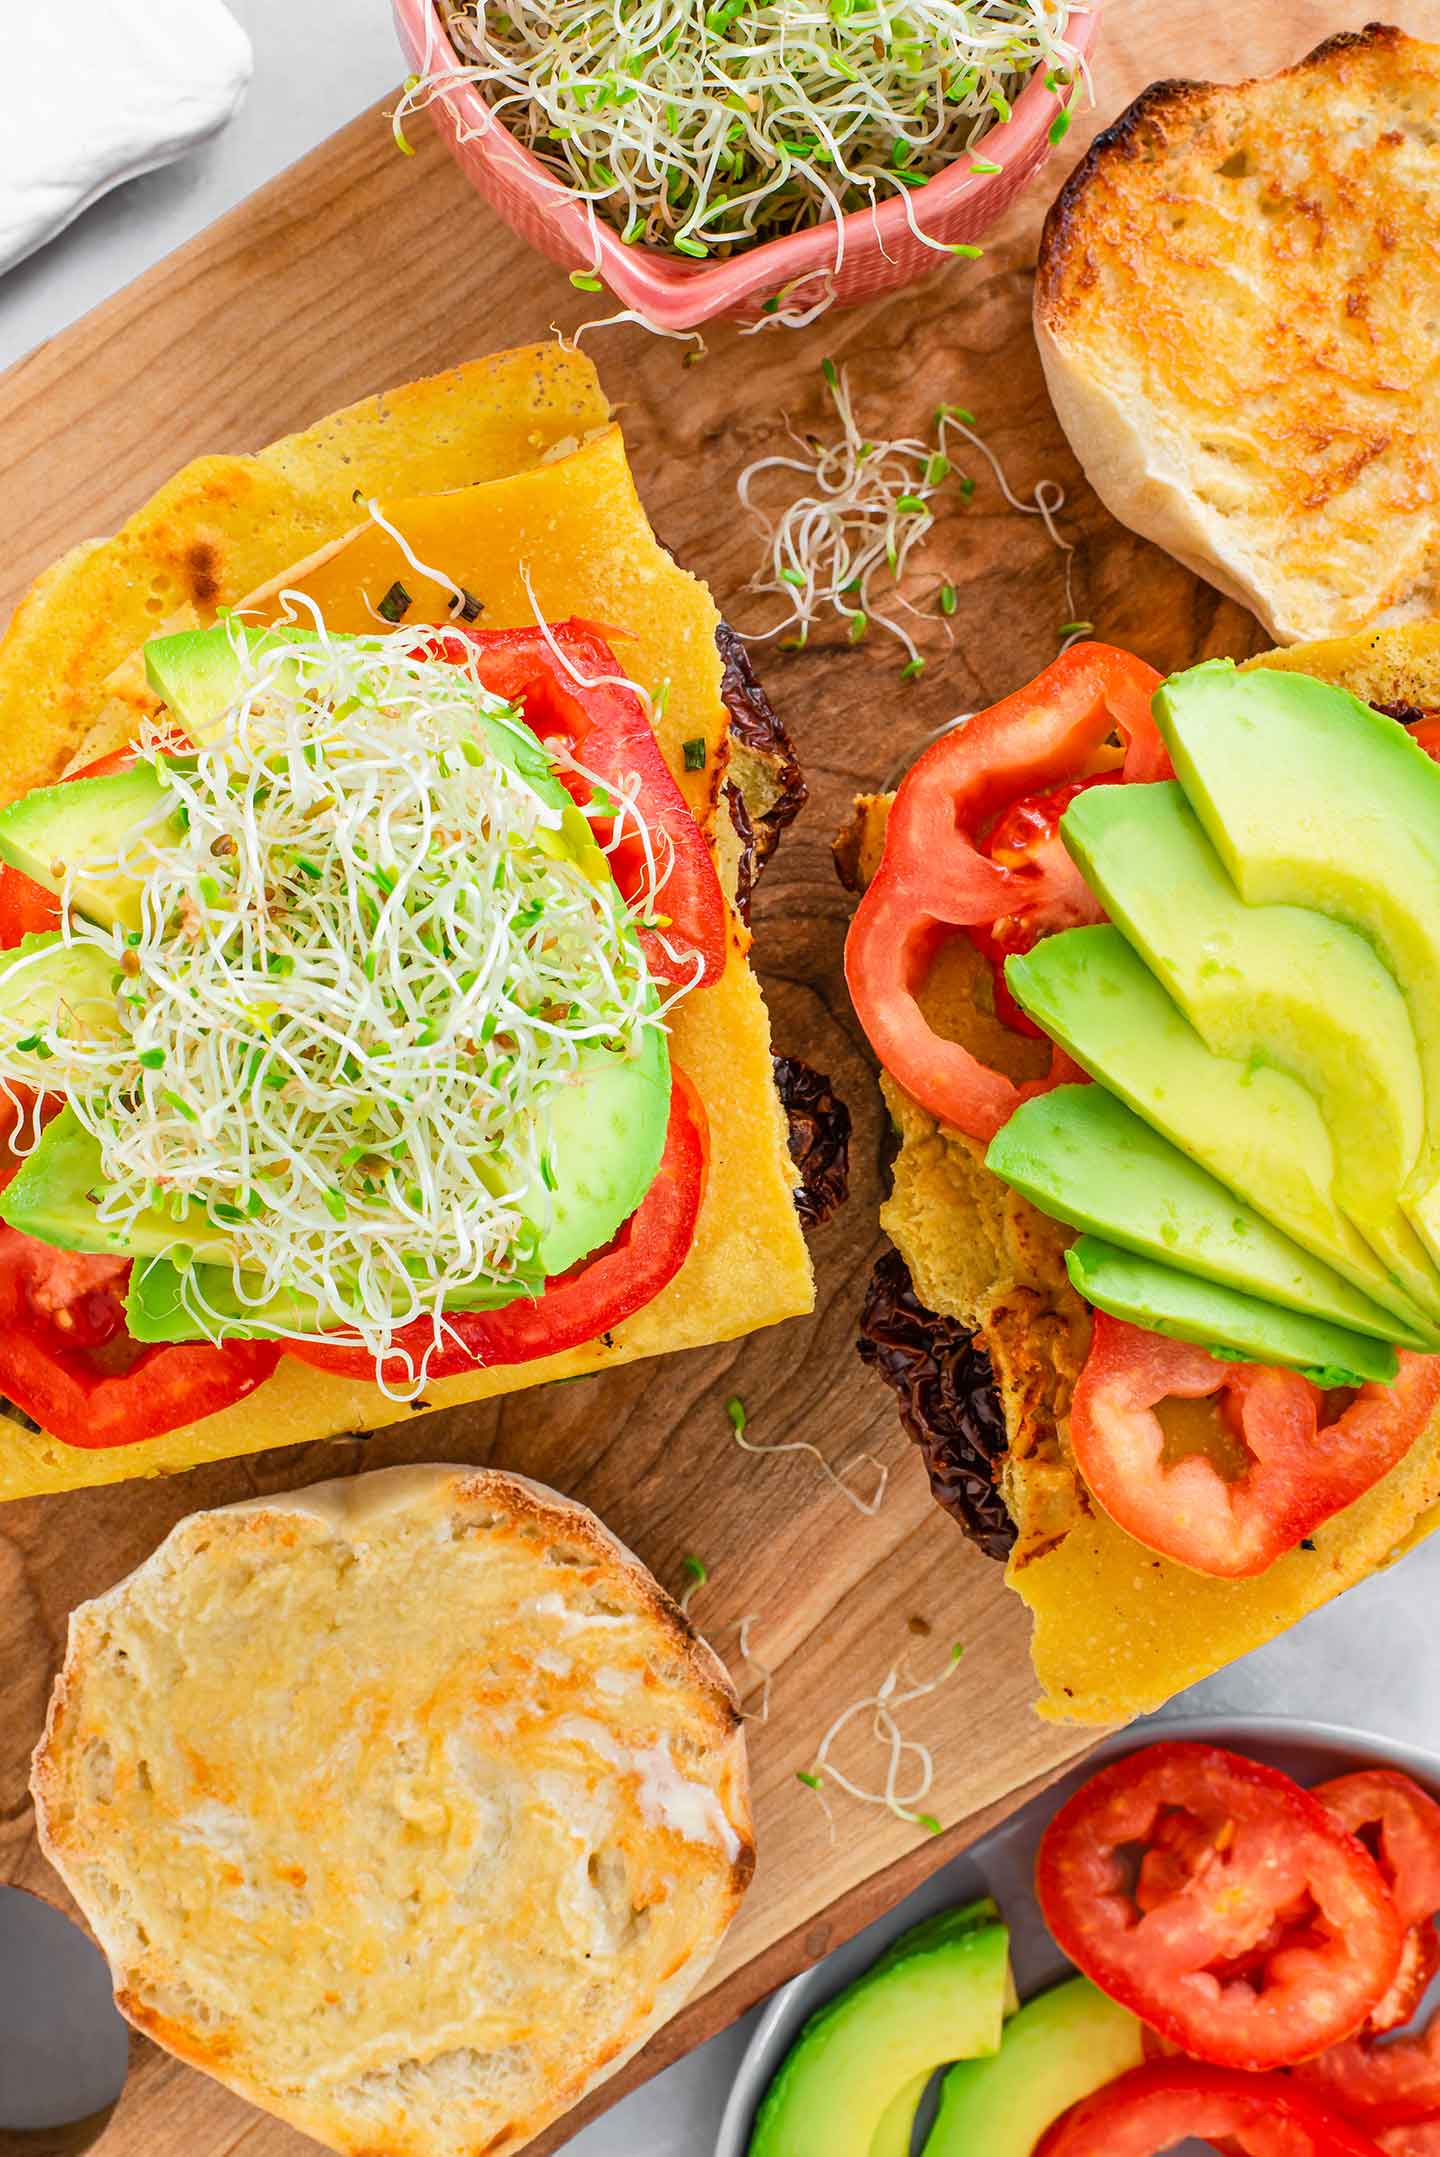 Top down view of two vegan Portuguese breakfast sandwiches without the tops. The omelettes have been folded into a triangular shape to fit on the sweet muffin bun.